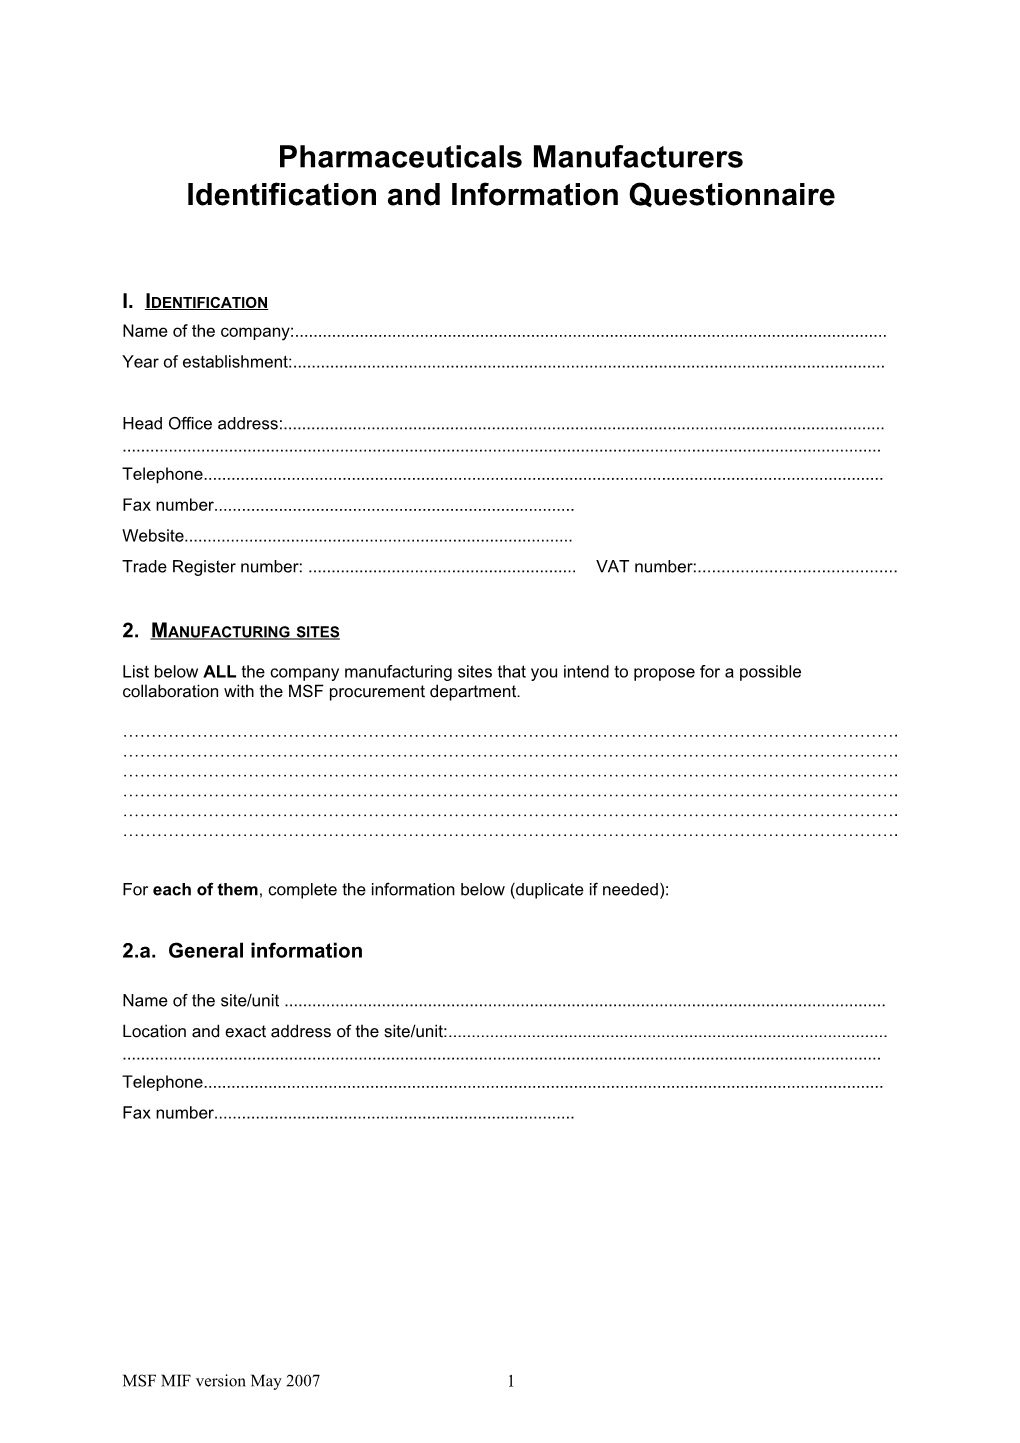 Identification and Information Questionnaire